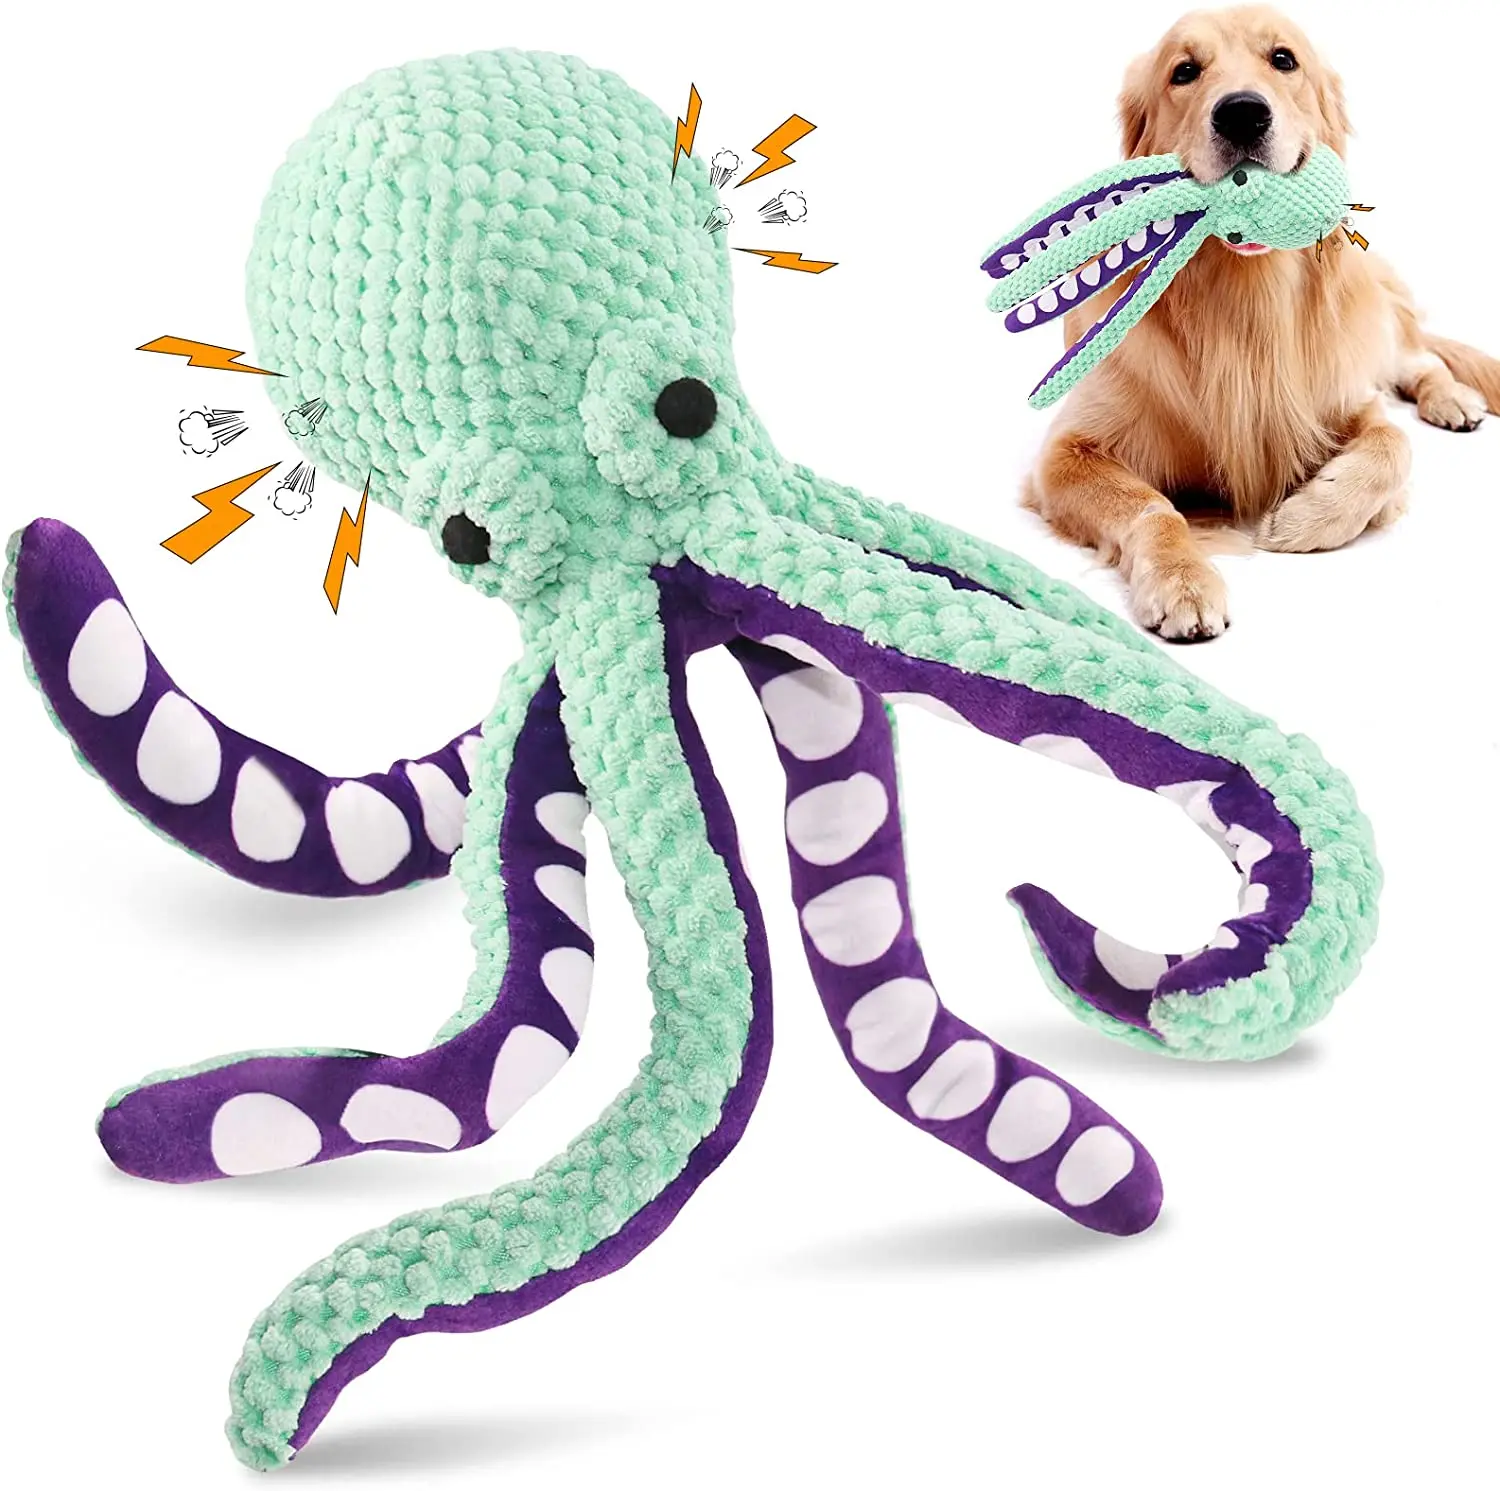 

ATUBAN Squeaky Dog Toys,Durable Plush Dog Toy,Octopus Stuffed Dog Toys,Dog Toys for Large Dogs,Puppy Chew Interactive Dog Toys